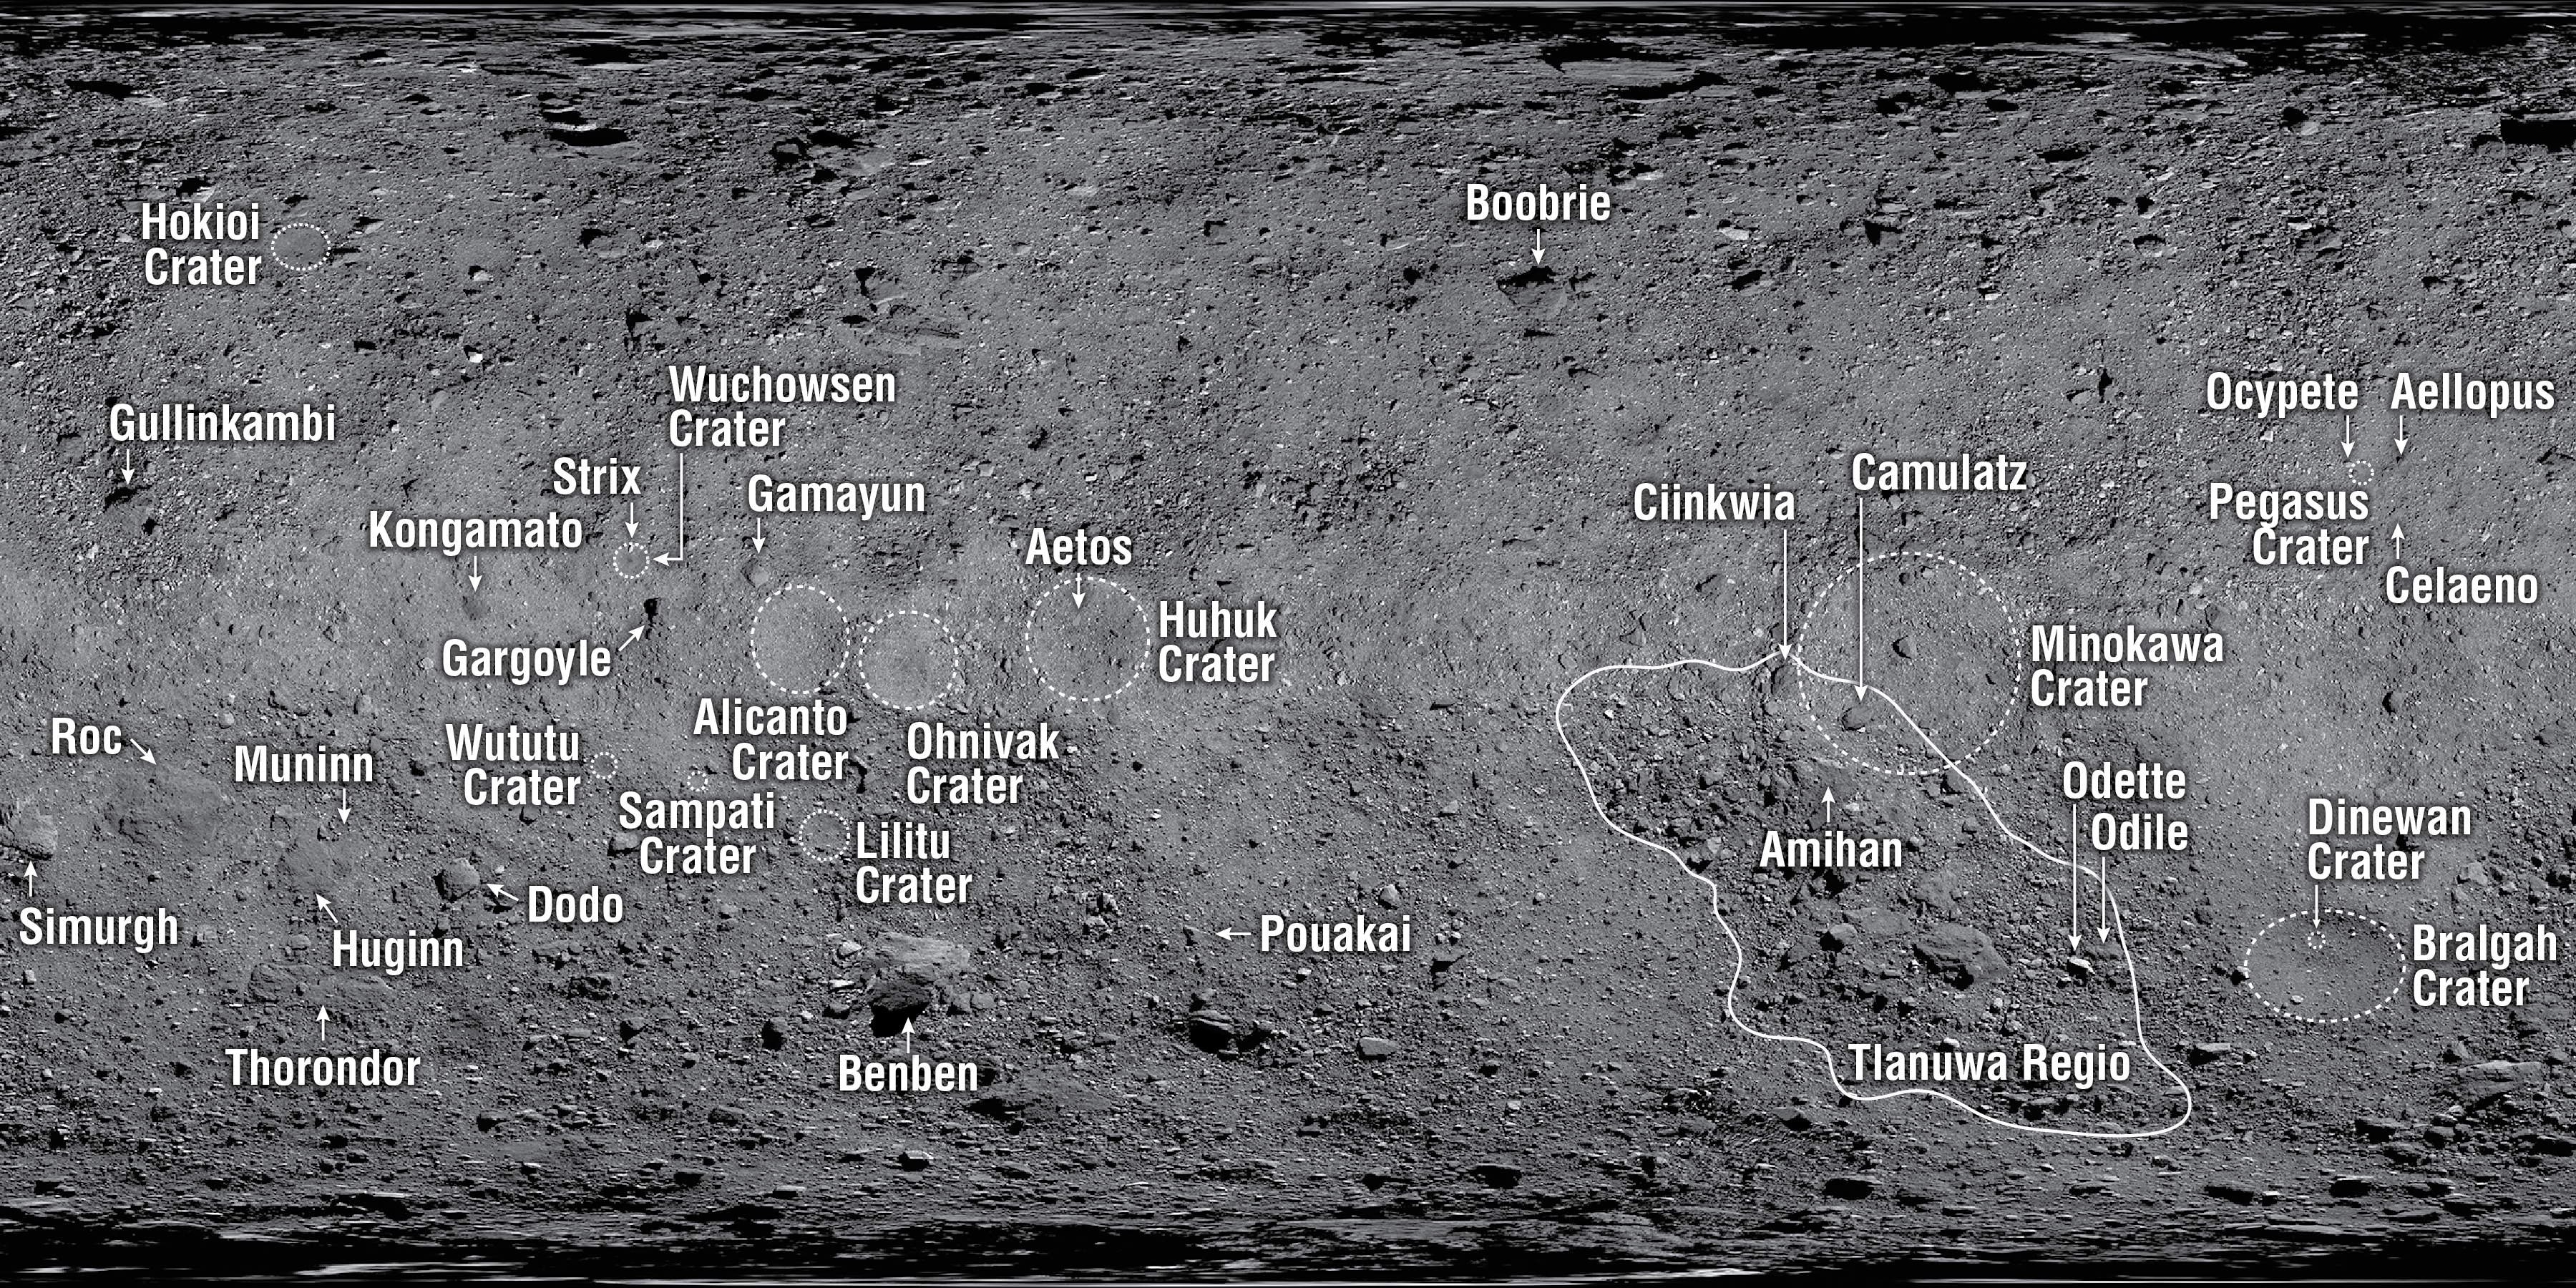 This map shows the various surface features on Bennu with names approved by the International Astronomical Union (IAU).